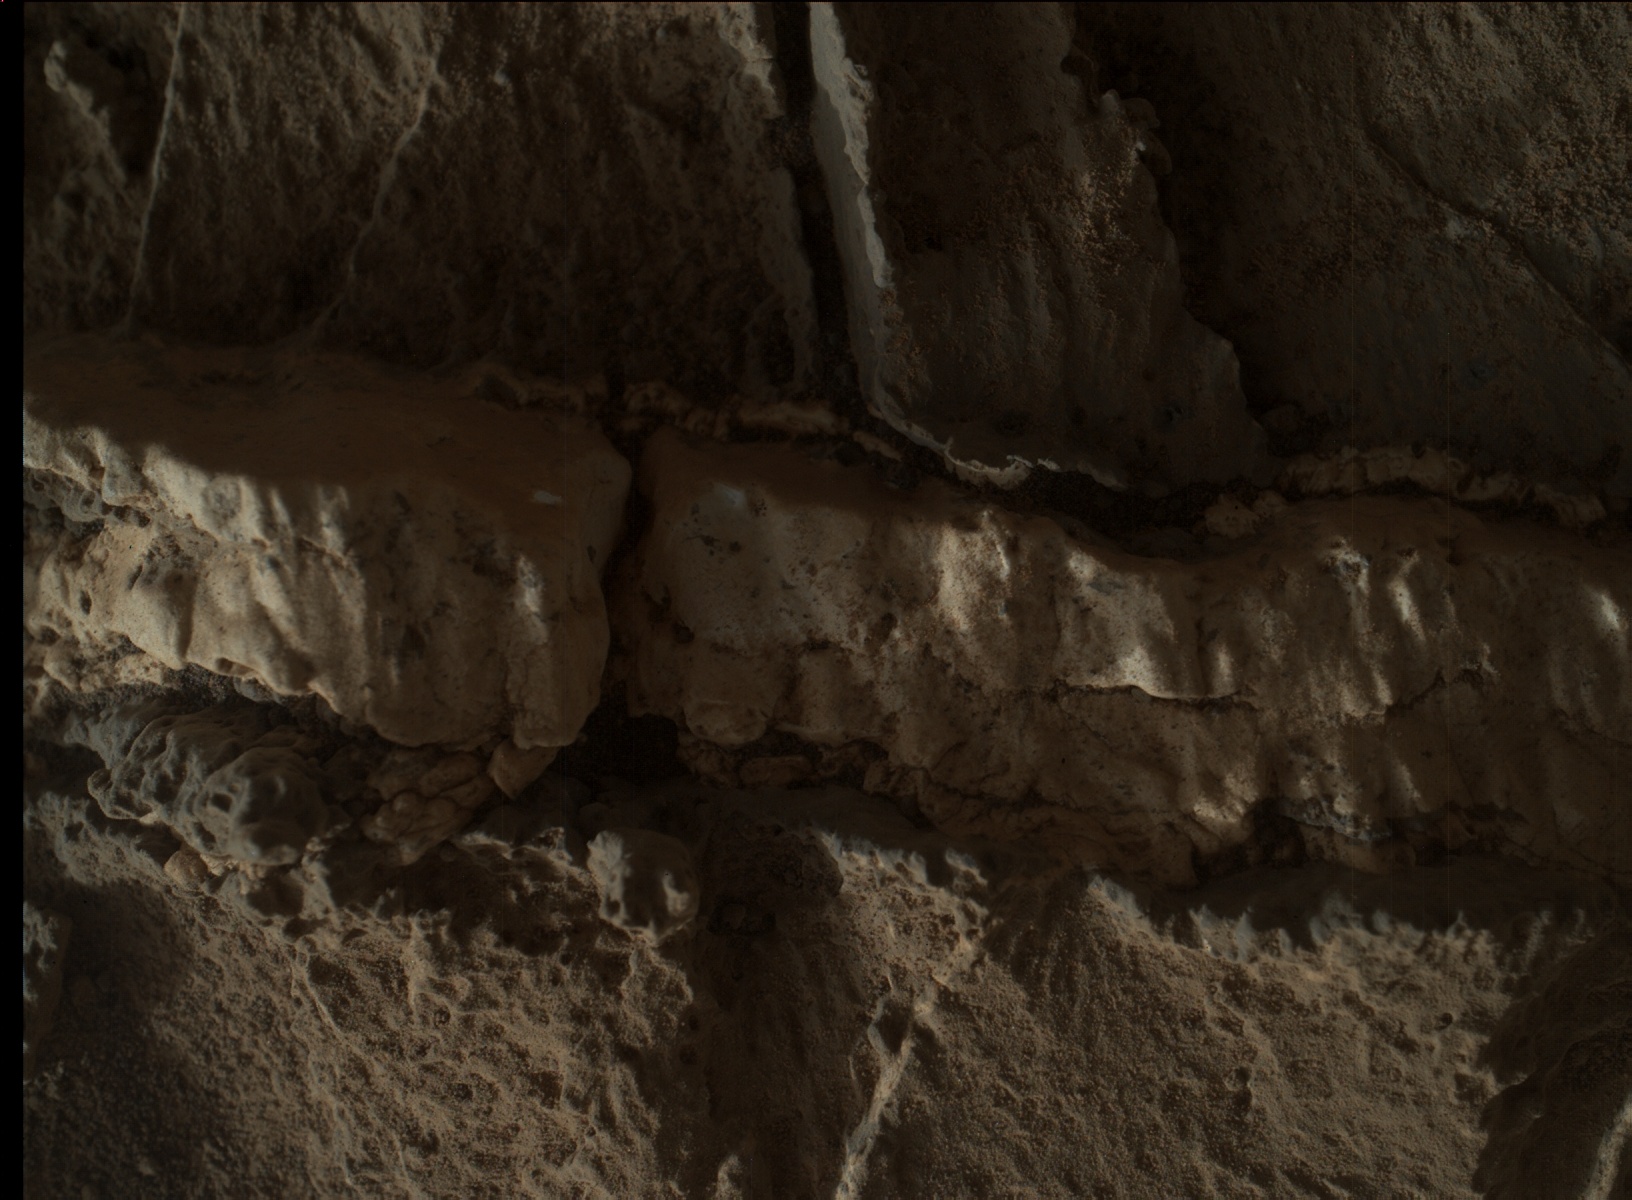 Nasa's Mars rover Curiosity acquired this image using its Mars Hand Lens Imager (MAHLI) on Sol 1275